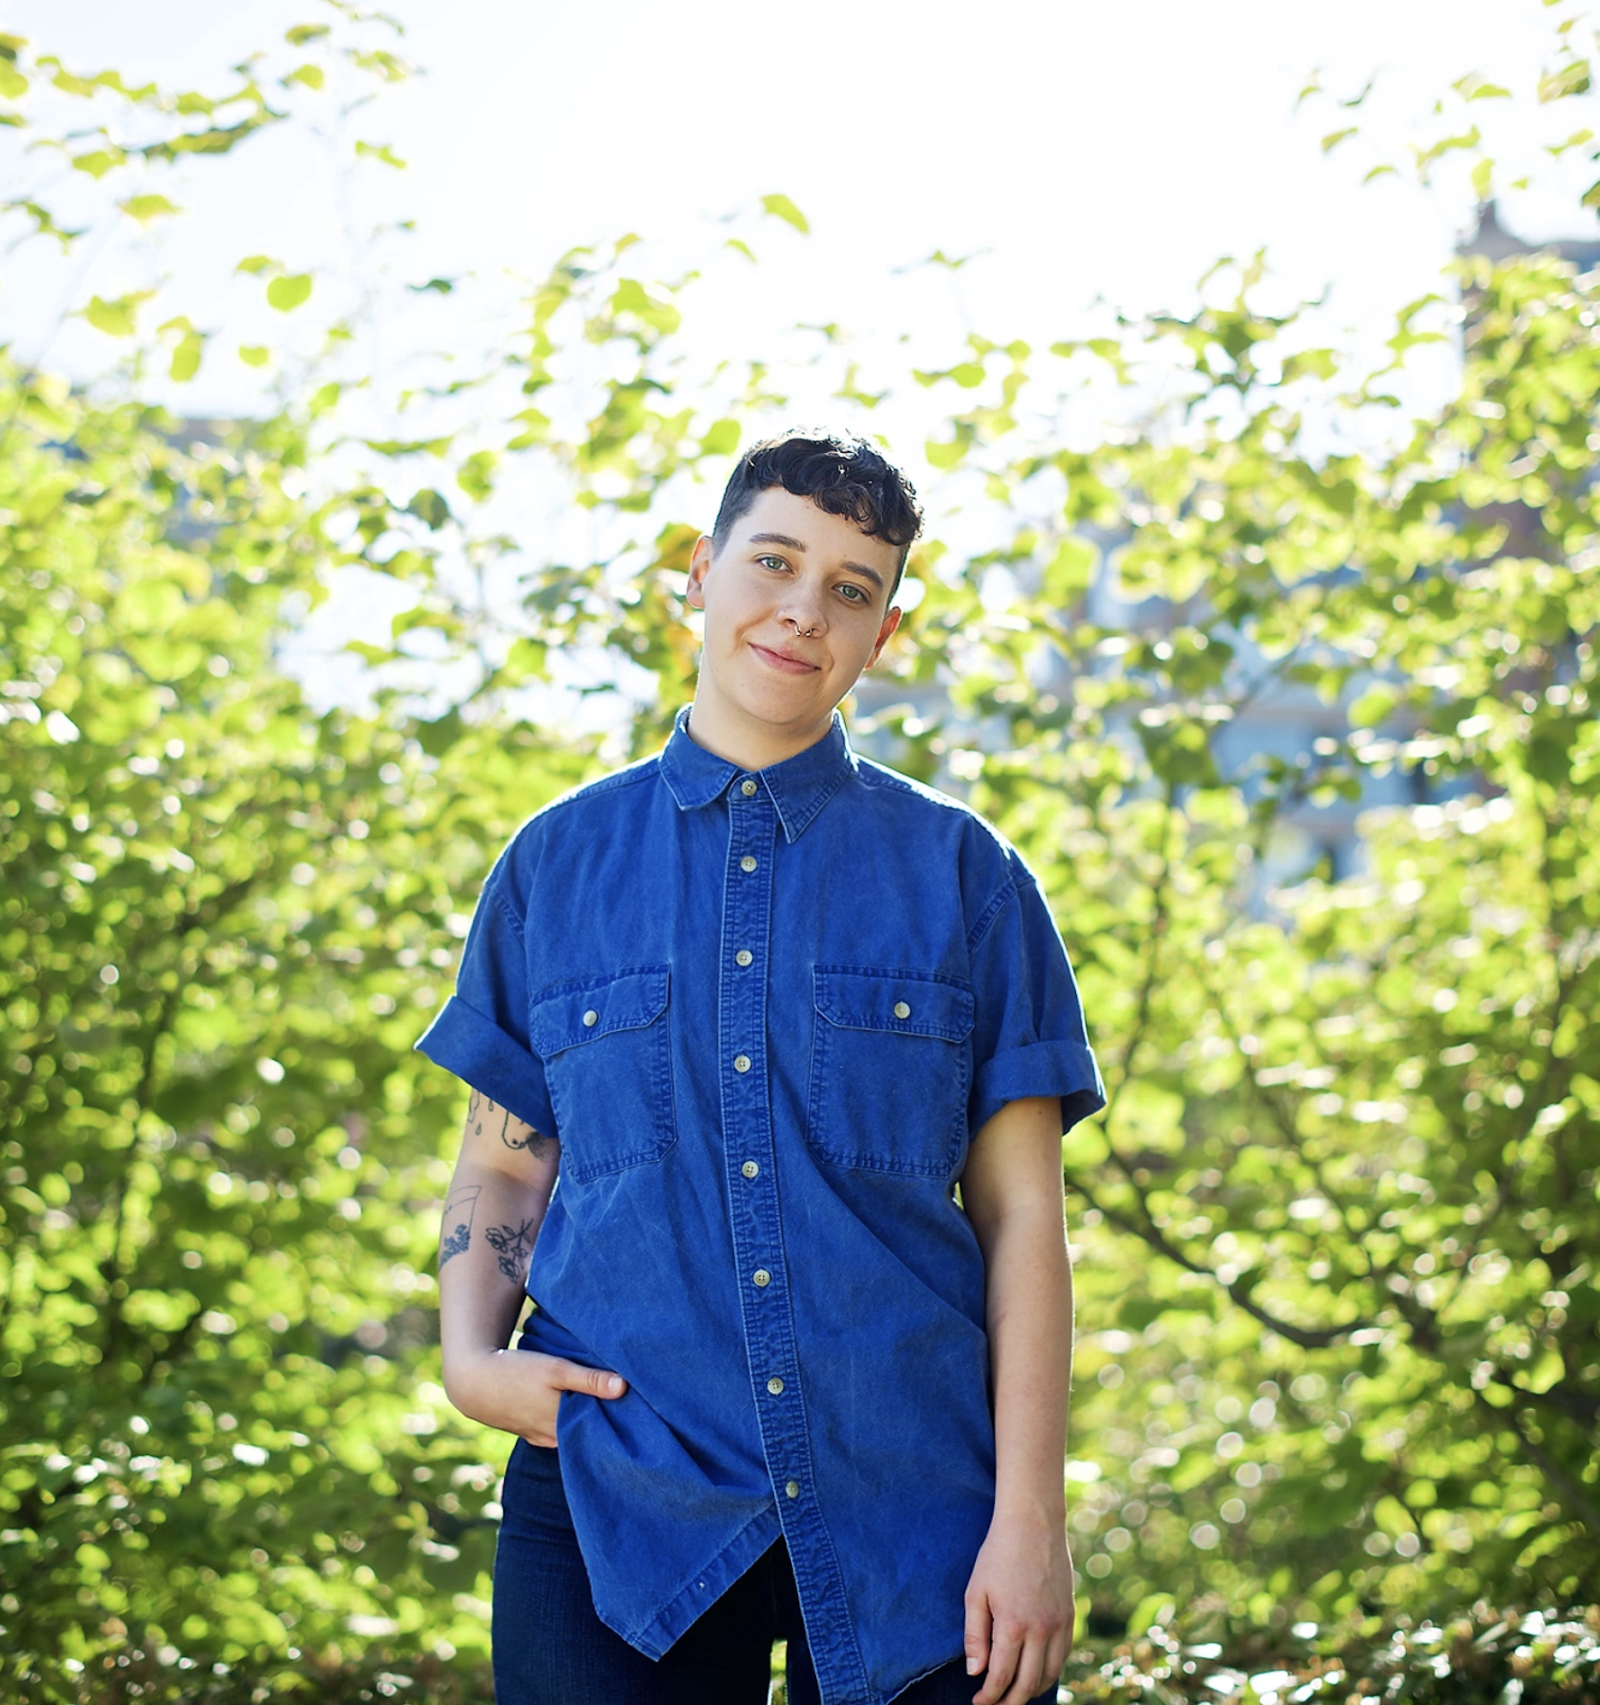 Kit McKeown: wearing short-sleeve jean shirt, has brown hair an blue eyes and is similing at camera with one hand in pocket standing in front of green trees